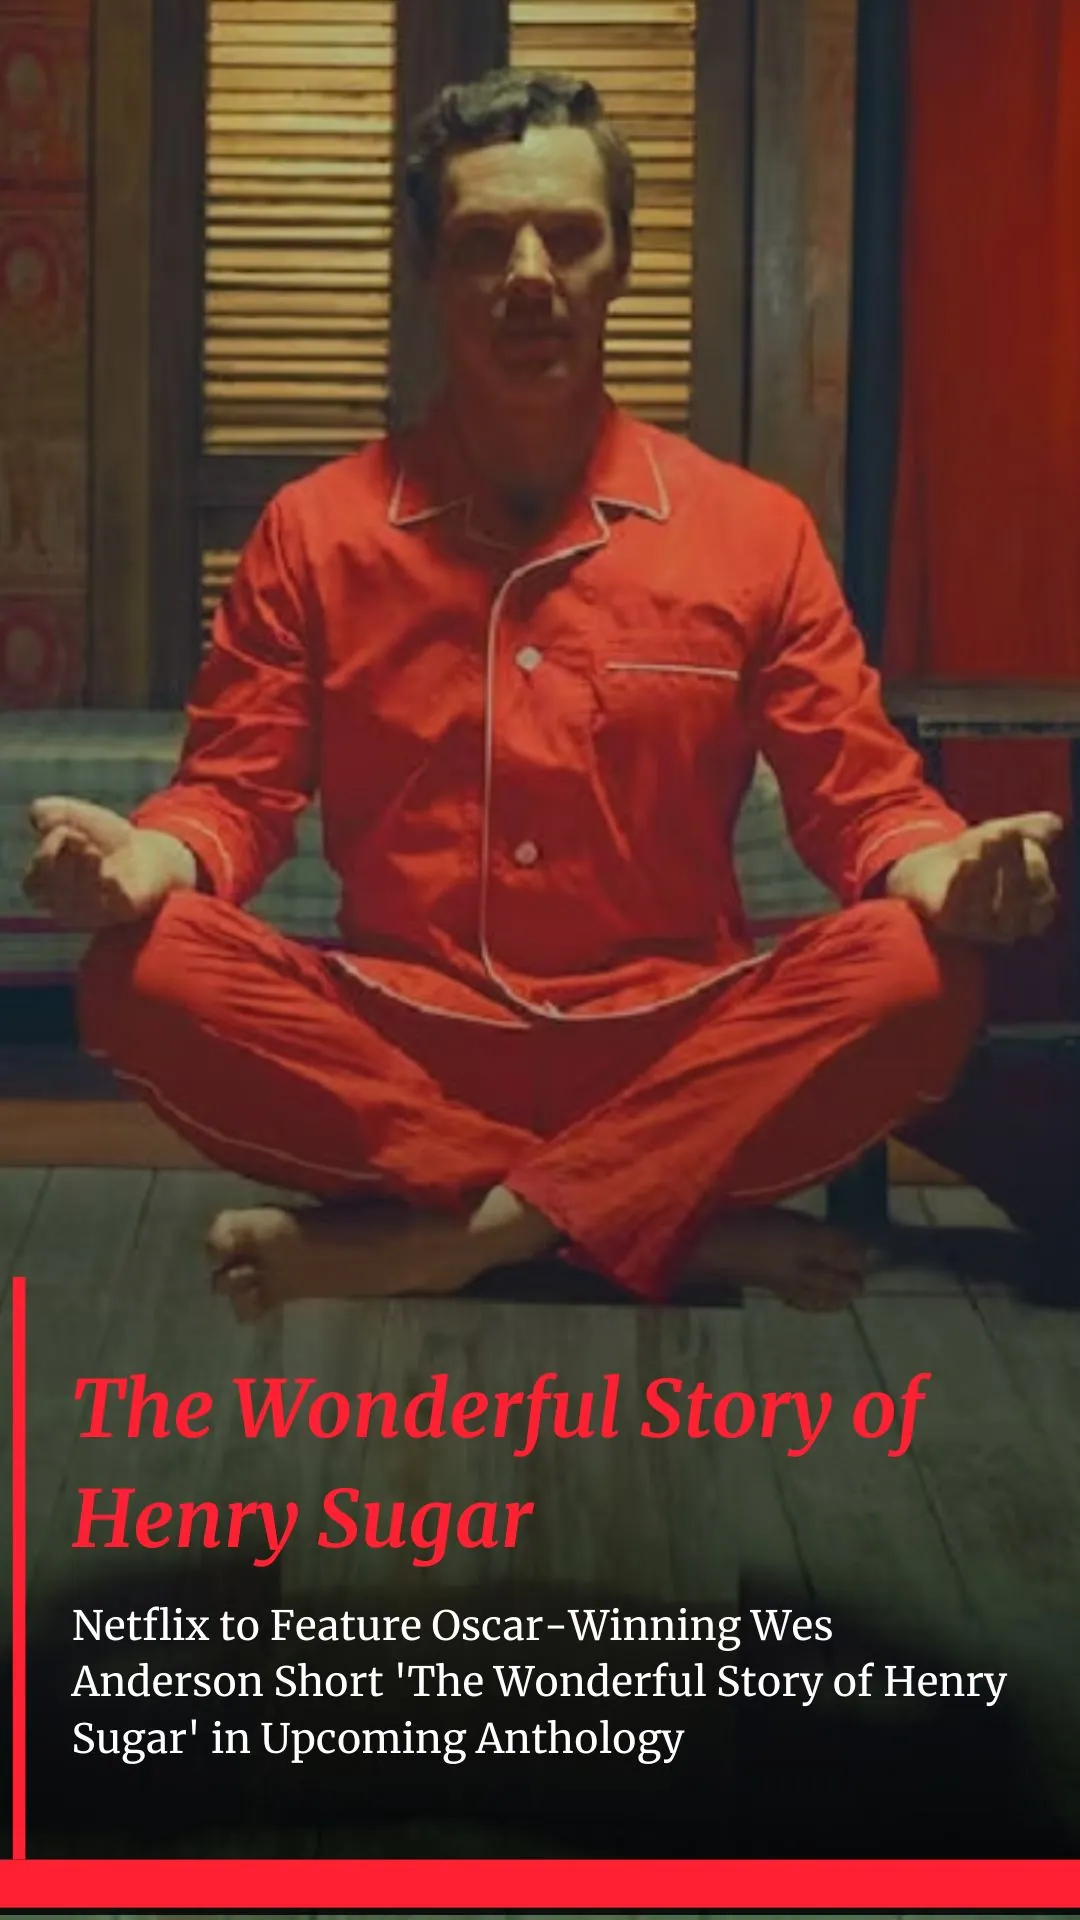 Netflix to Feature Oscar-Winning Wes Anderson Short 'The Wonderful Story of Henry Sugar' in Upcoming Anthology